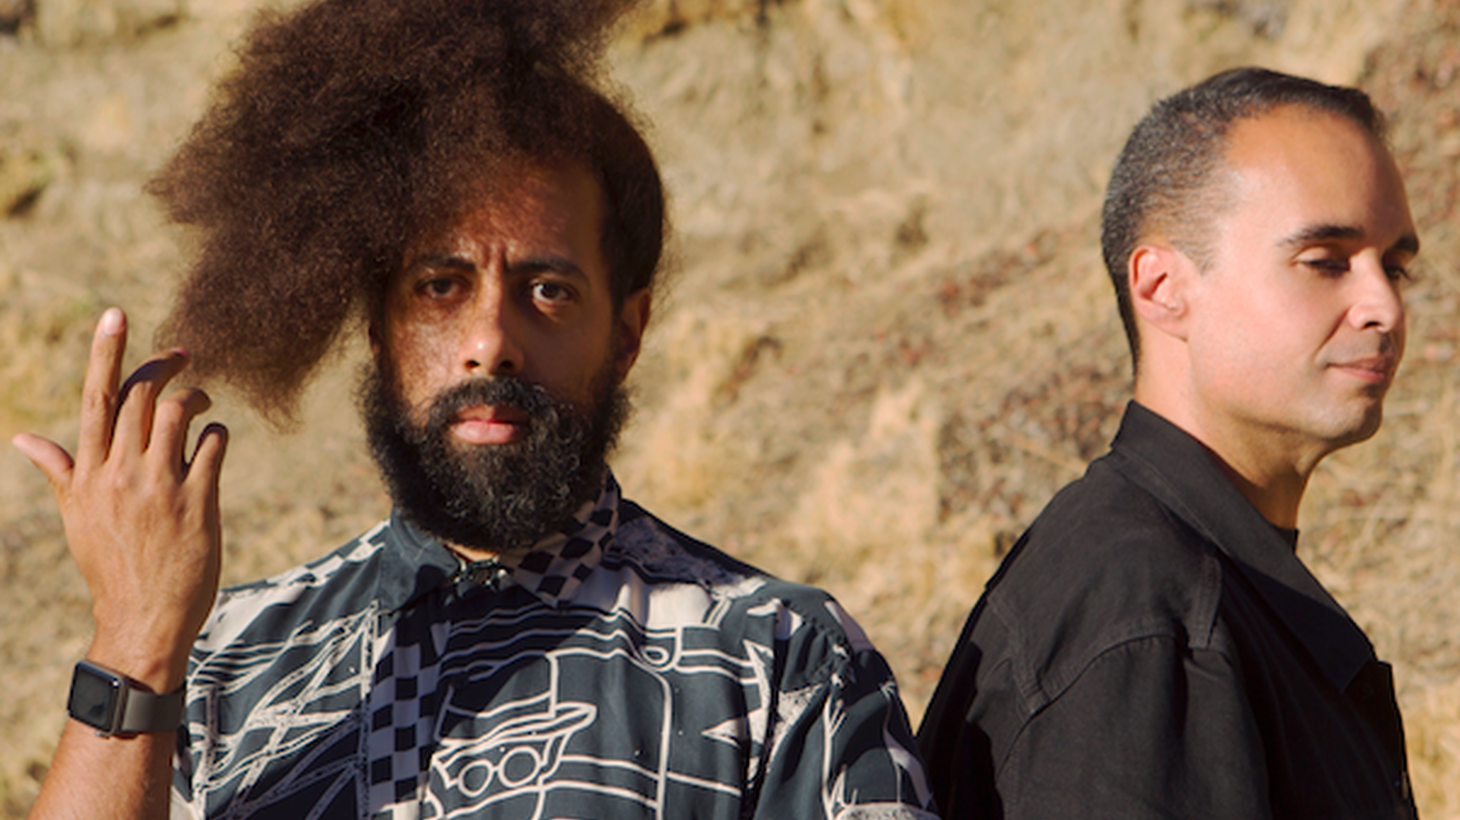 The brainchild of beat-boxer, comedian, and musician Reggie Watts, and electronic music artist, DJ, and producer John Tejada will make their worldwide live radio debut. They will truly be creating in the moment so come along for the ride!